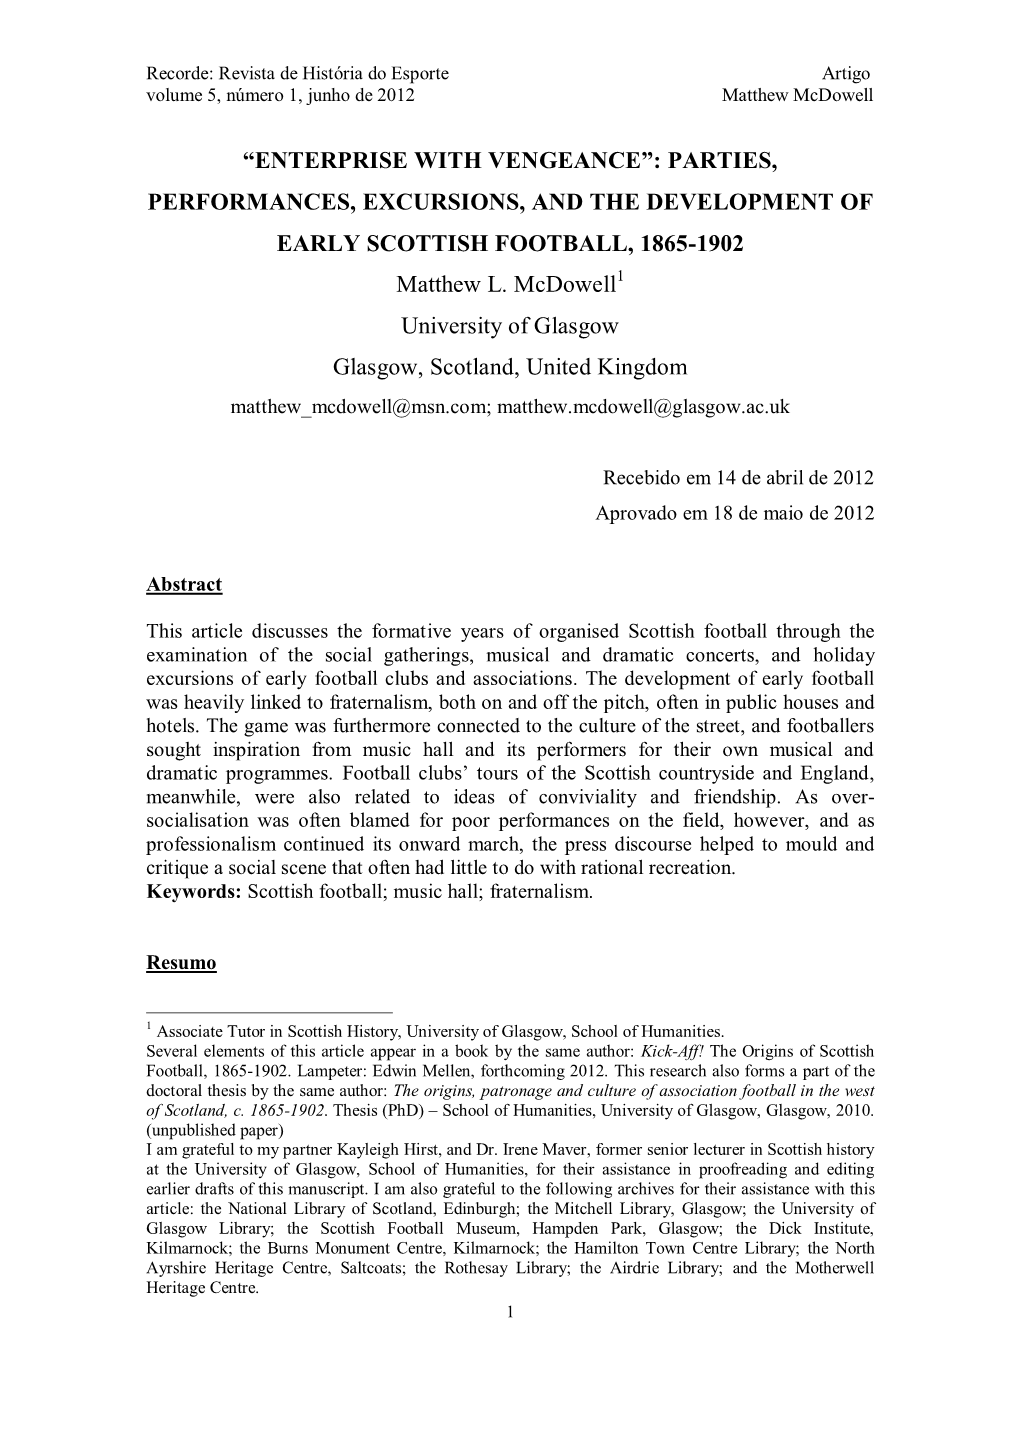 PARTIES, PERFORMANCES, EXCURSIONS, and the DEVELOPMENT of EARLY SCOTTISH FOOTBALL, 1865-1902 Matthew L